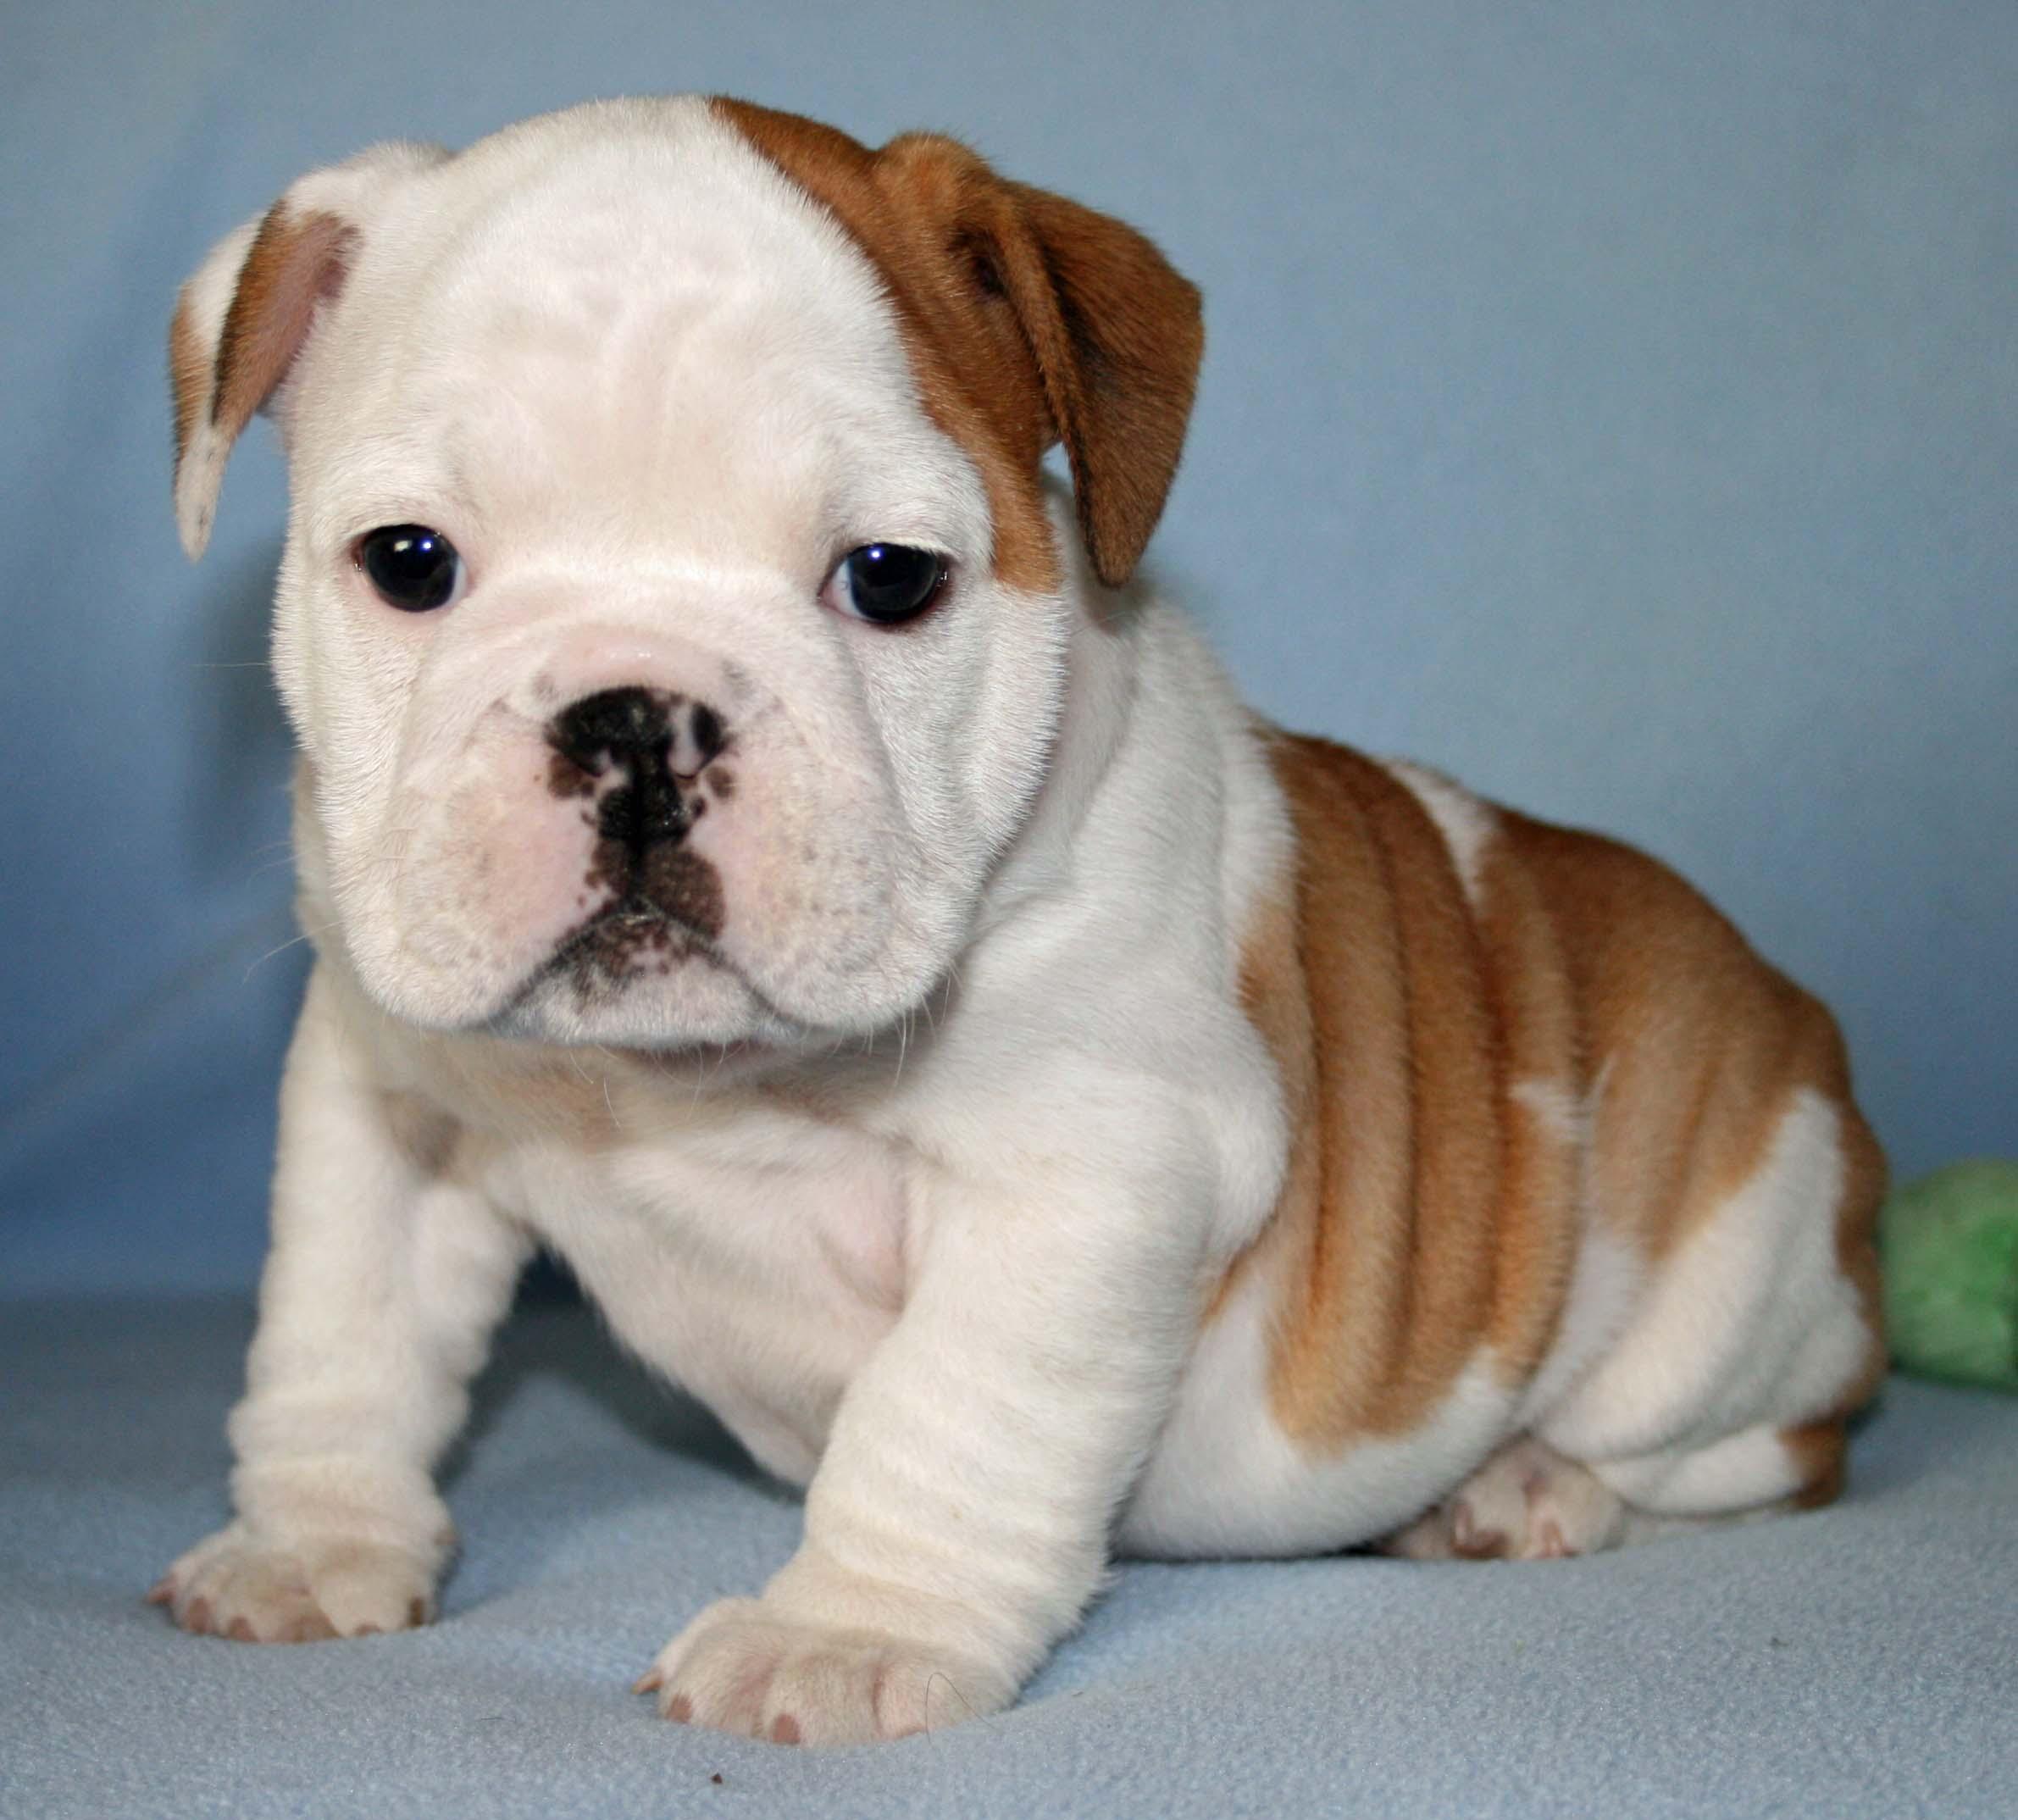 Stunning Baby Bulldogs Wallpaper image For Free Download